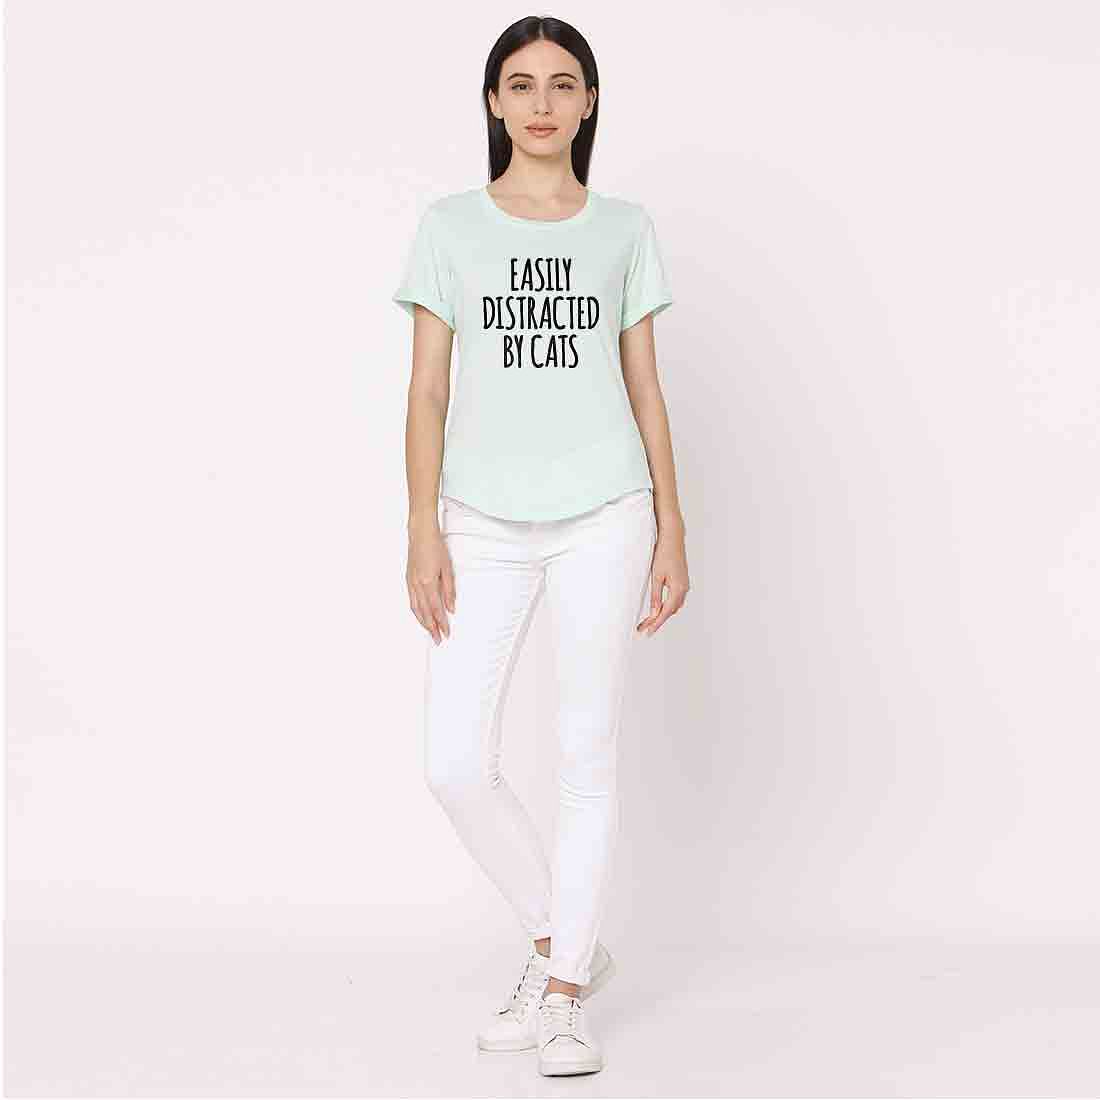 Love Cats T shirt For Girls  - Easily Distracted by Cats Nutcase